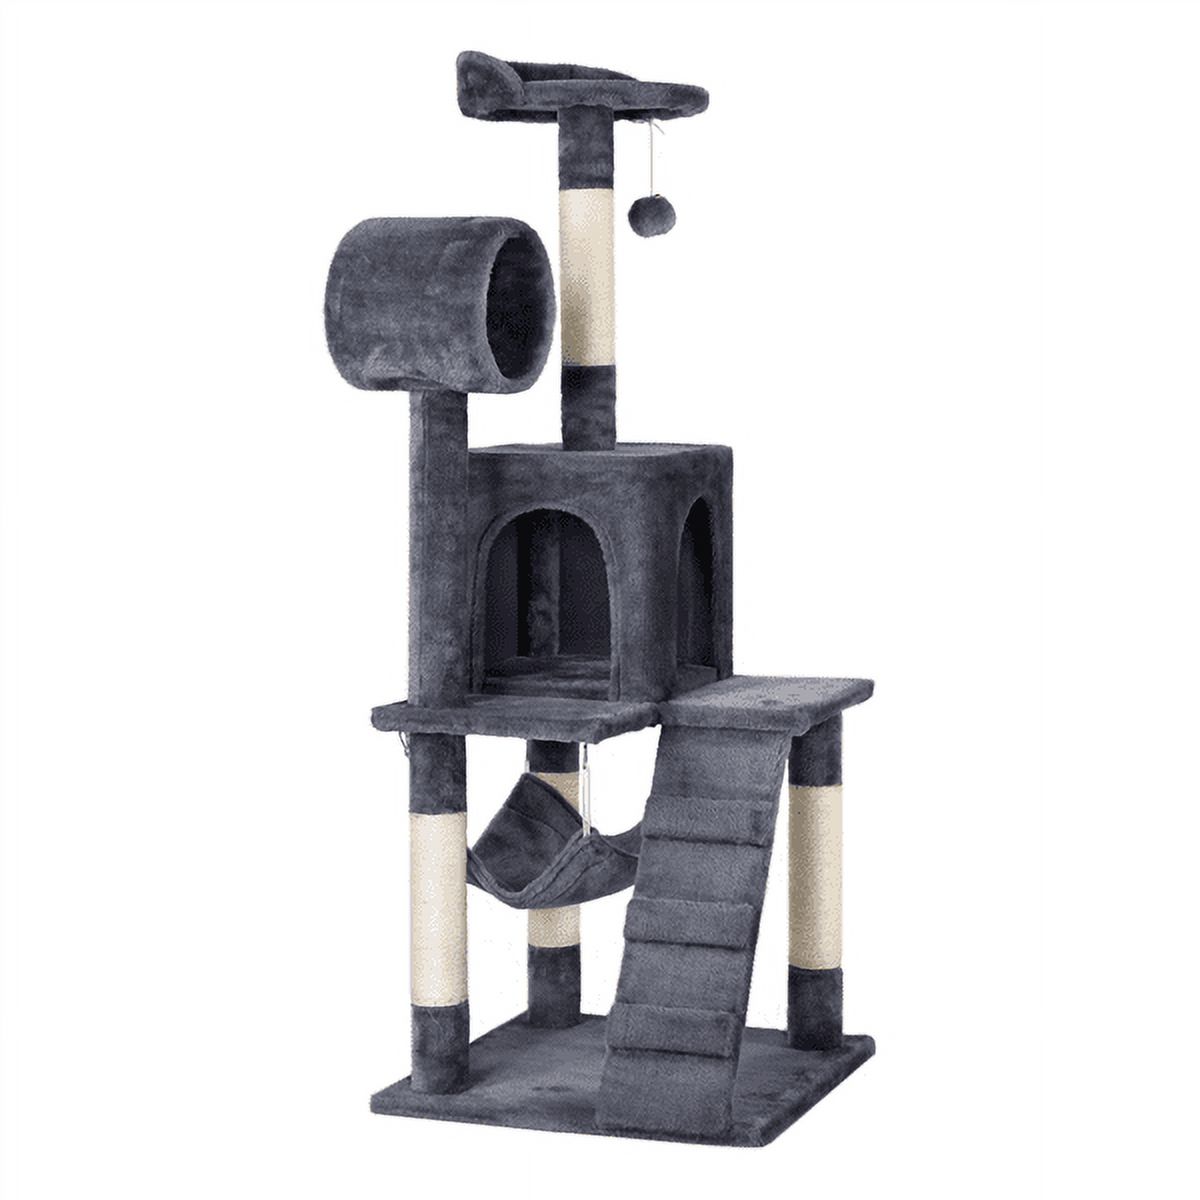 Alden Design 51" Cat Tree with Hammock and Scratching Post Tower, Dark Gray - image 1 of 17